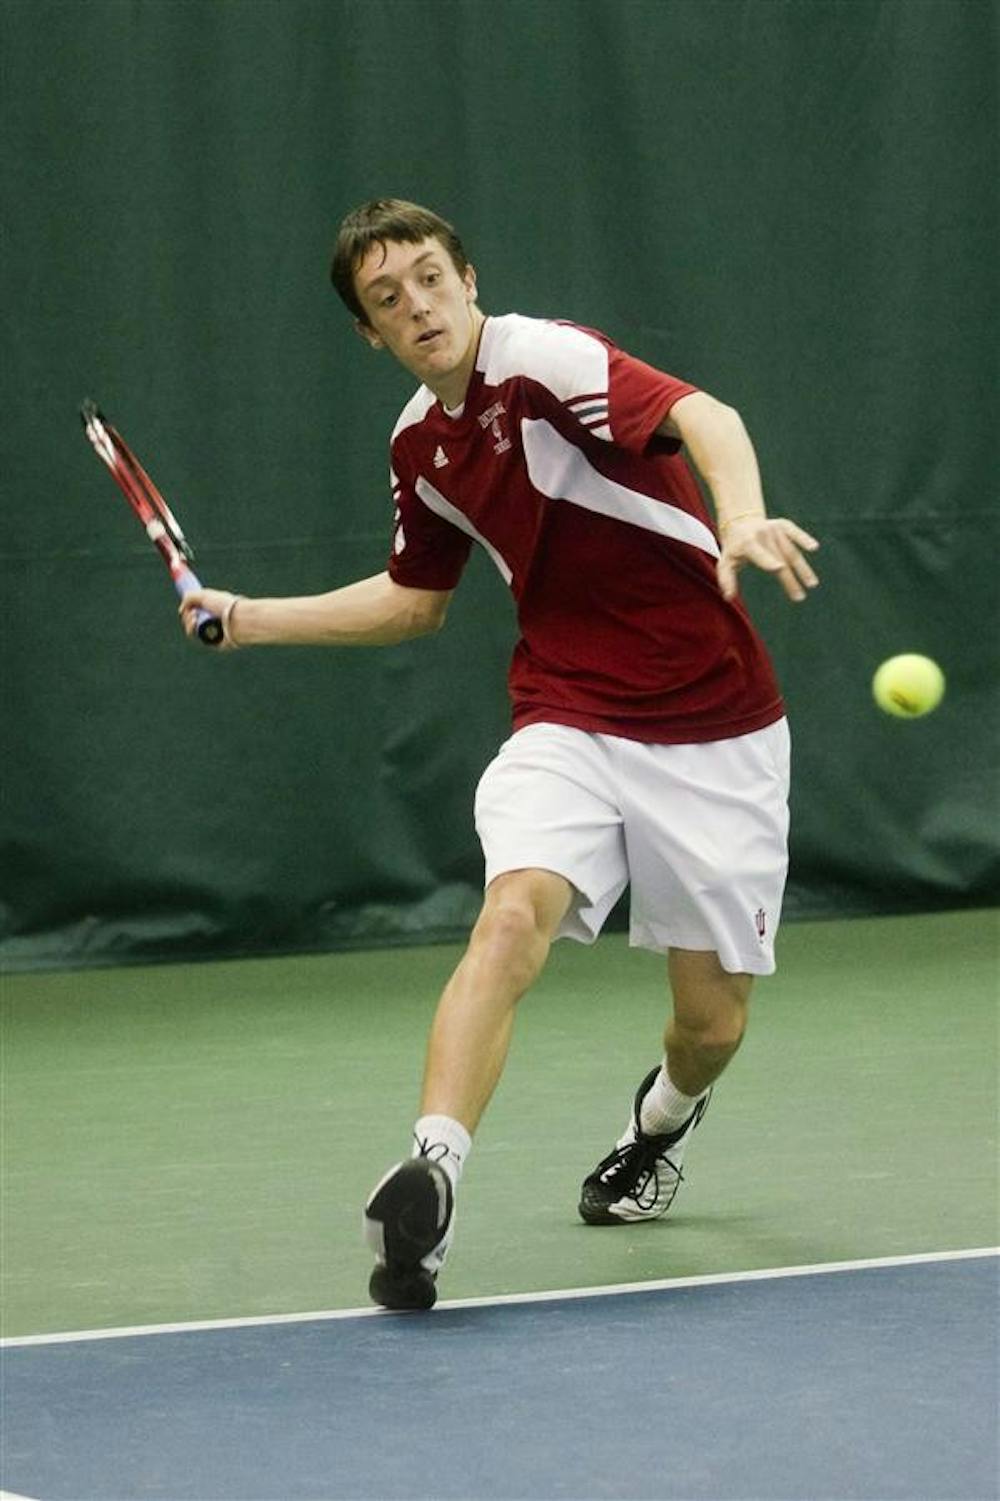 Sophomore Josh MacTaggart prepares to volley the ball during the Hoosier's 2-4 loss to Oklahoma on Feb. 13 at the IU Tennis Center.